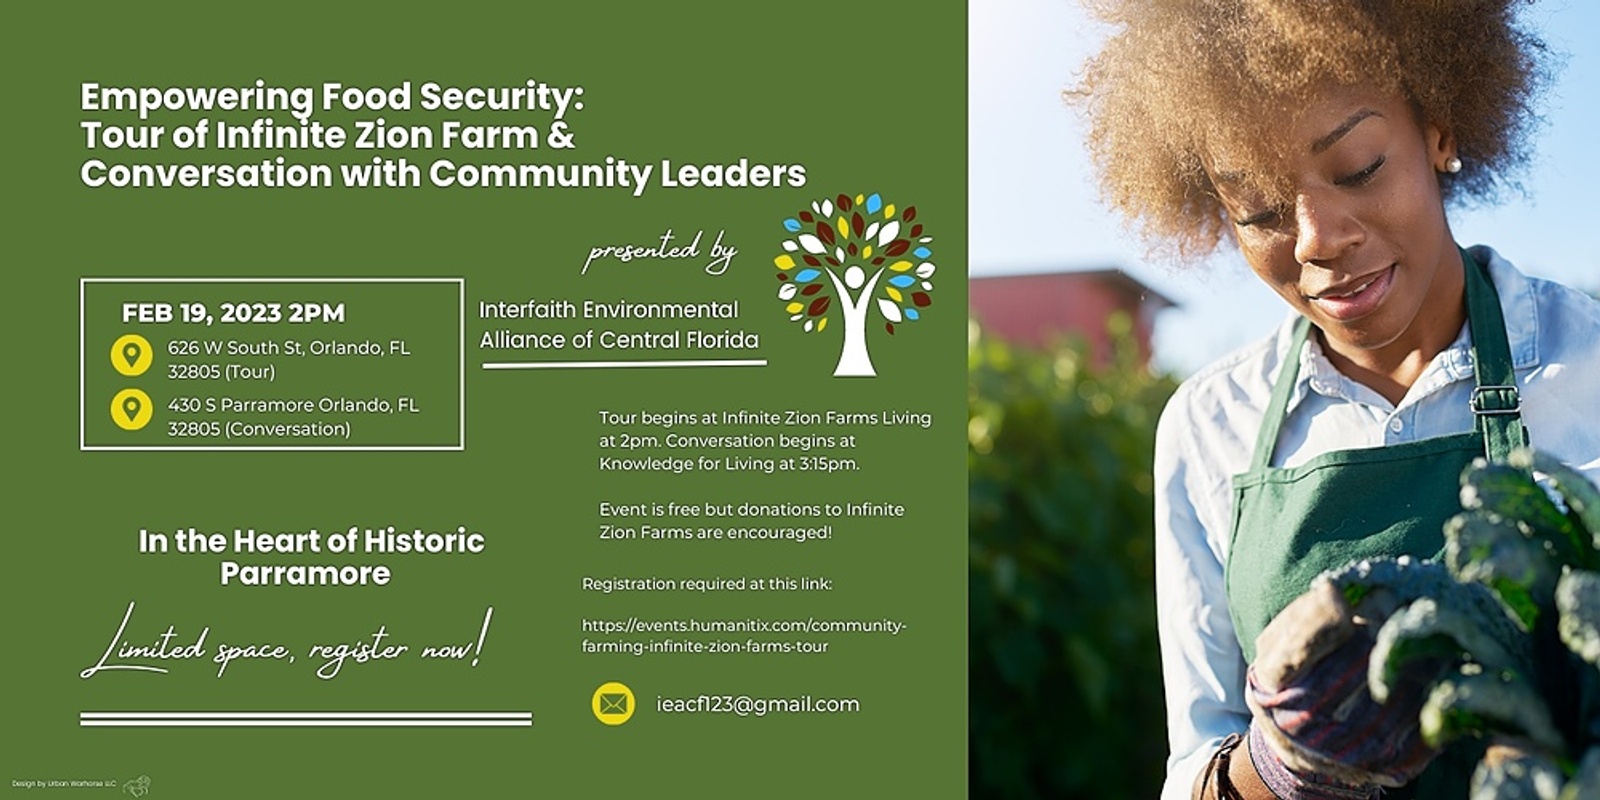 Banner image for Empowering Food Security - Infinite Zion Farms Tour & Conversation